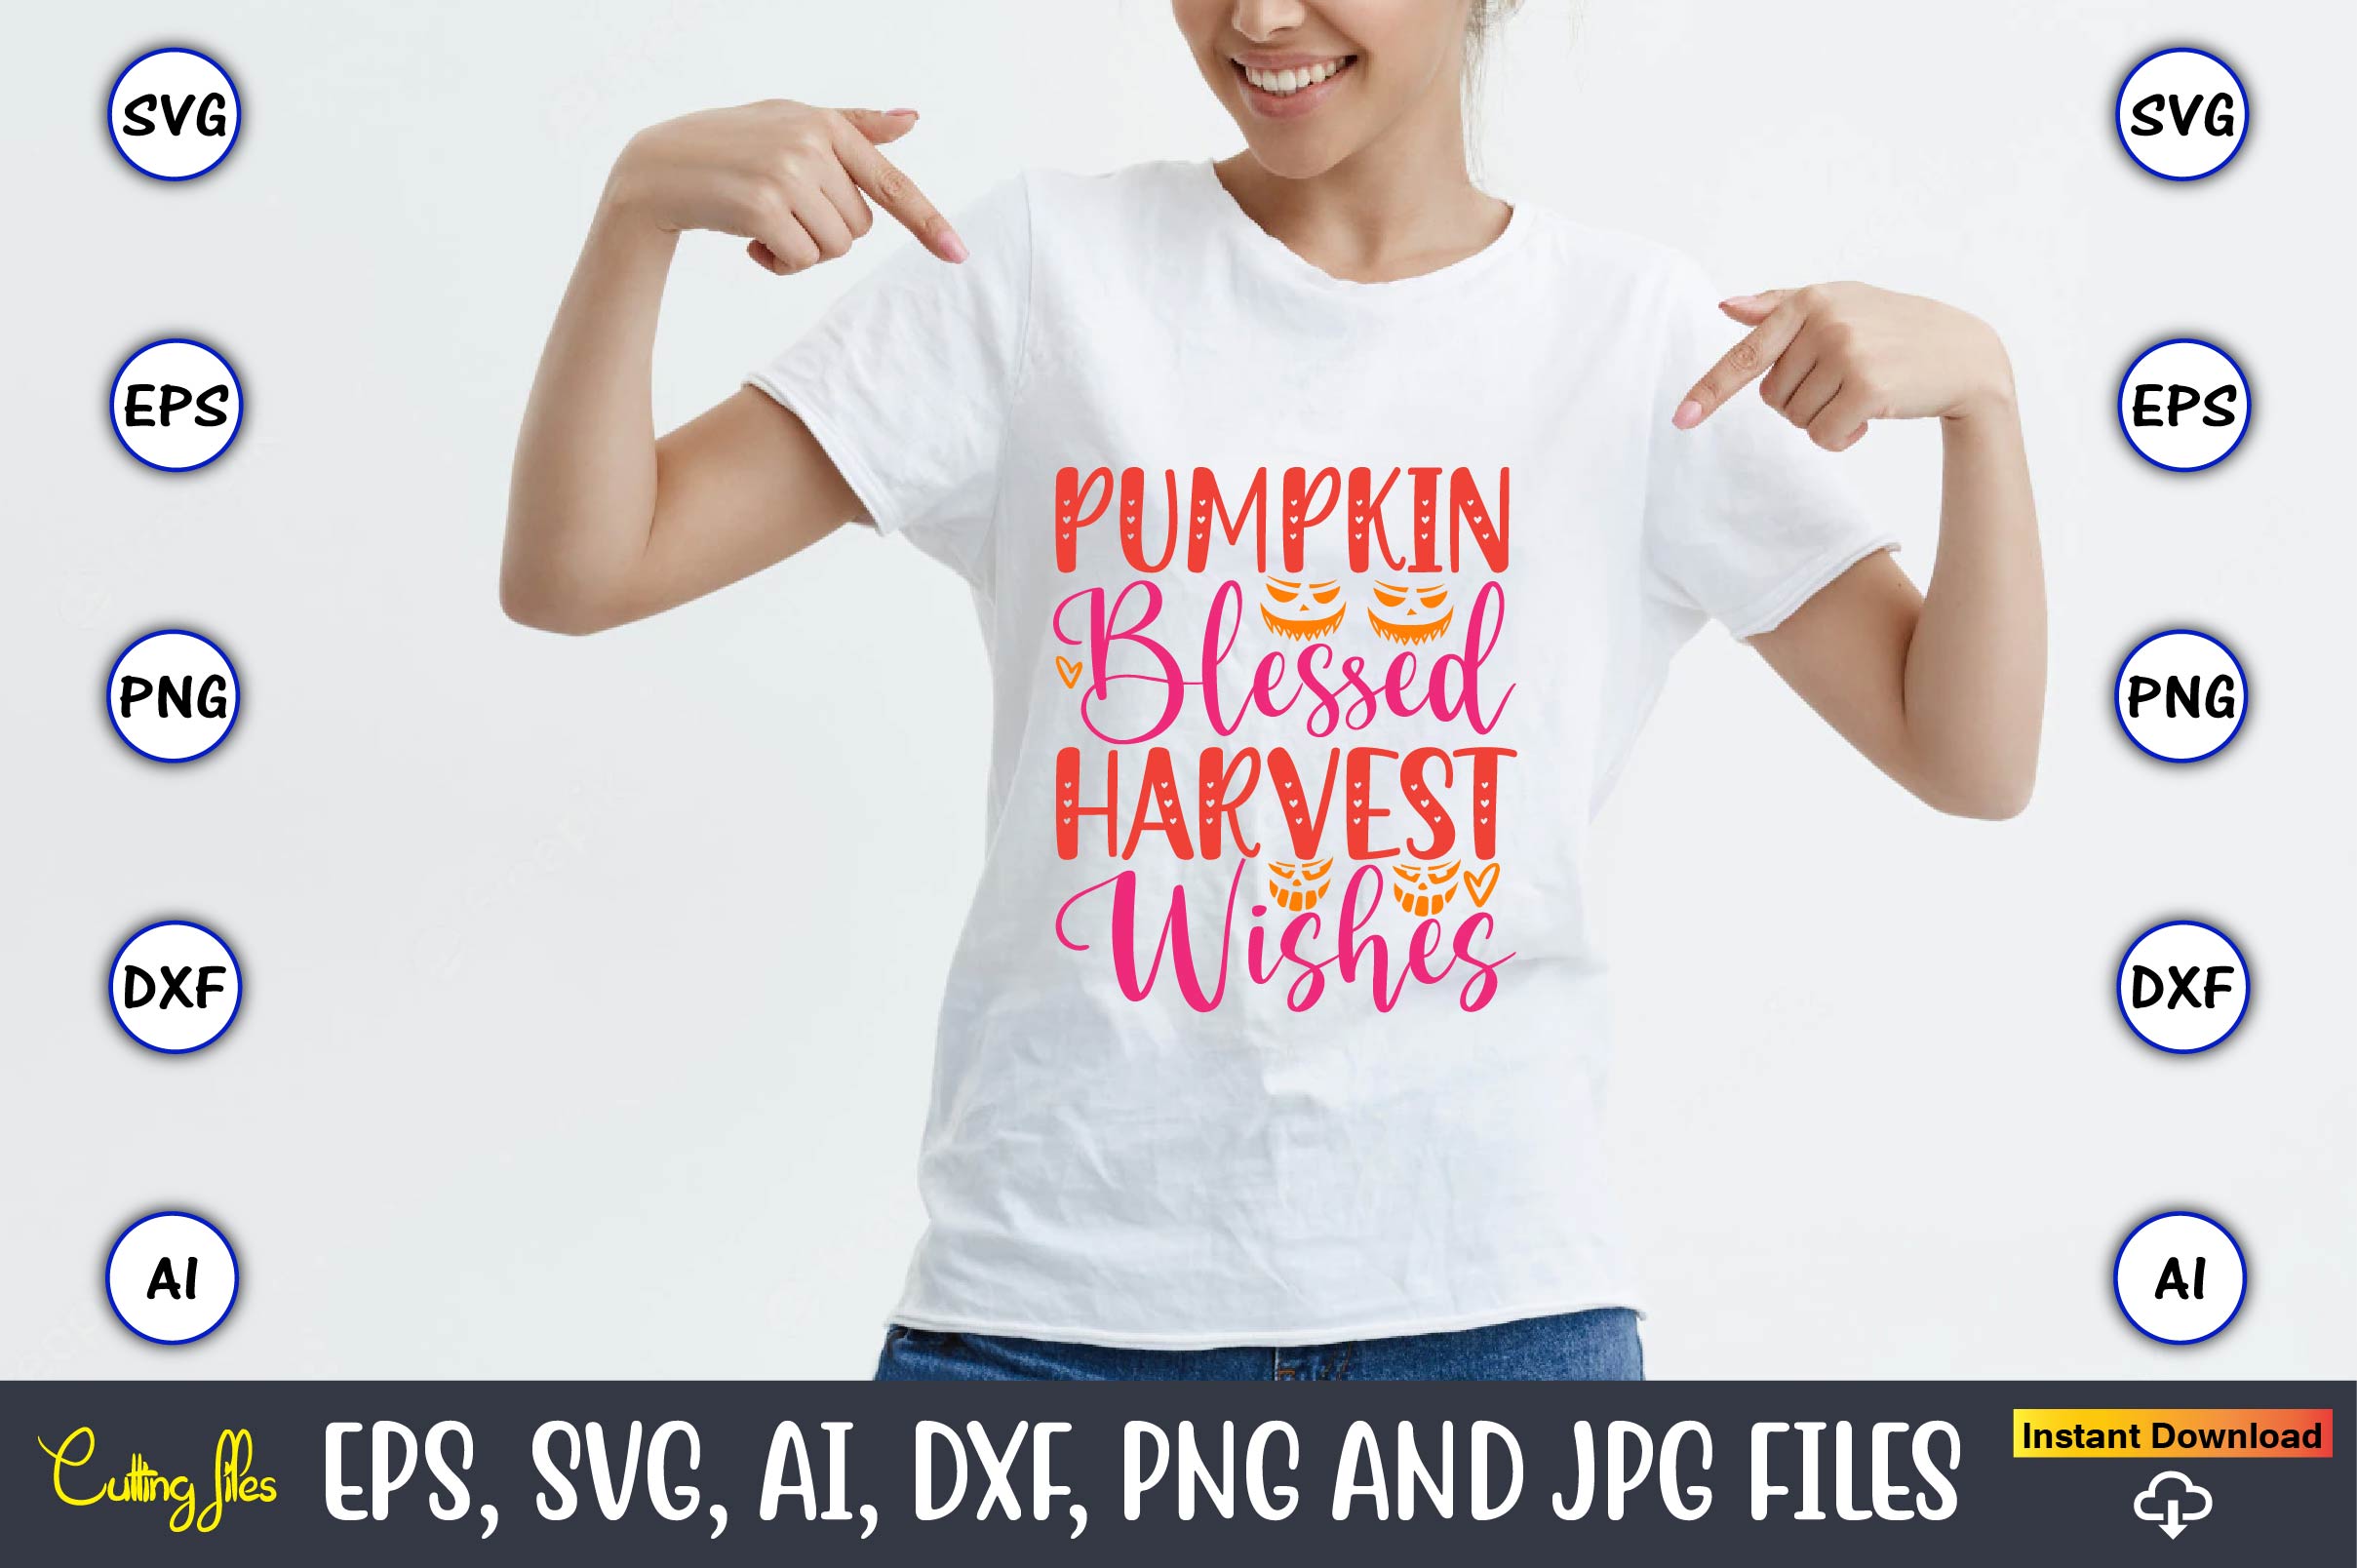 Image of a white t-shirt with a wonderful print Pumpkin blessed harvest wishes.